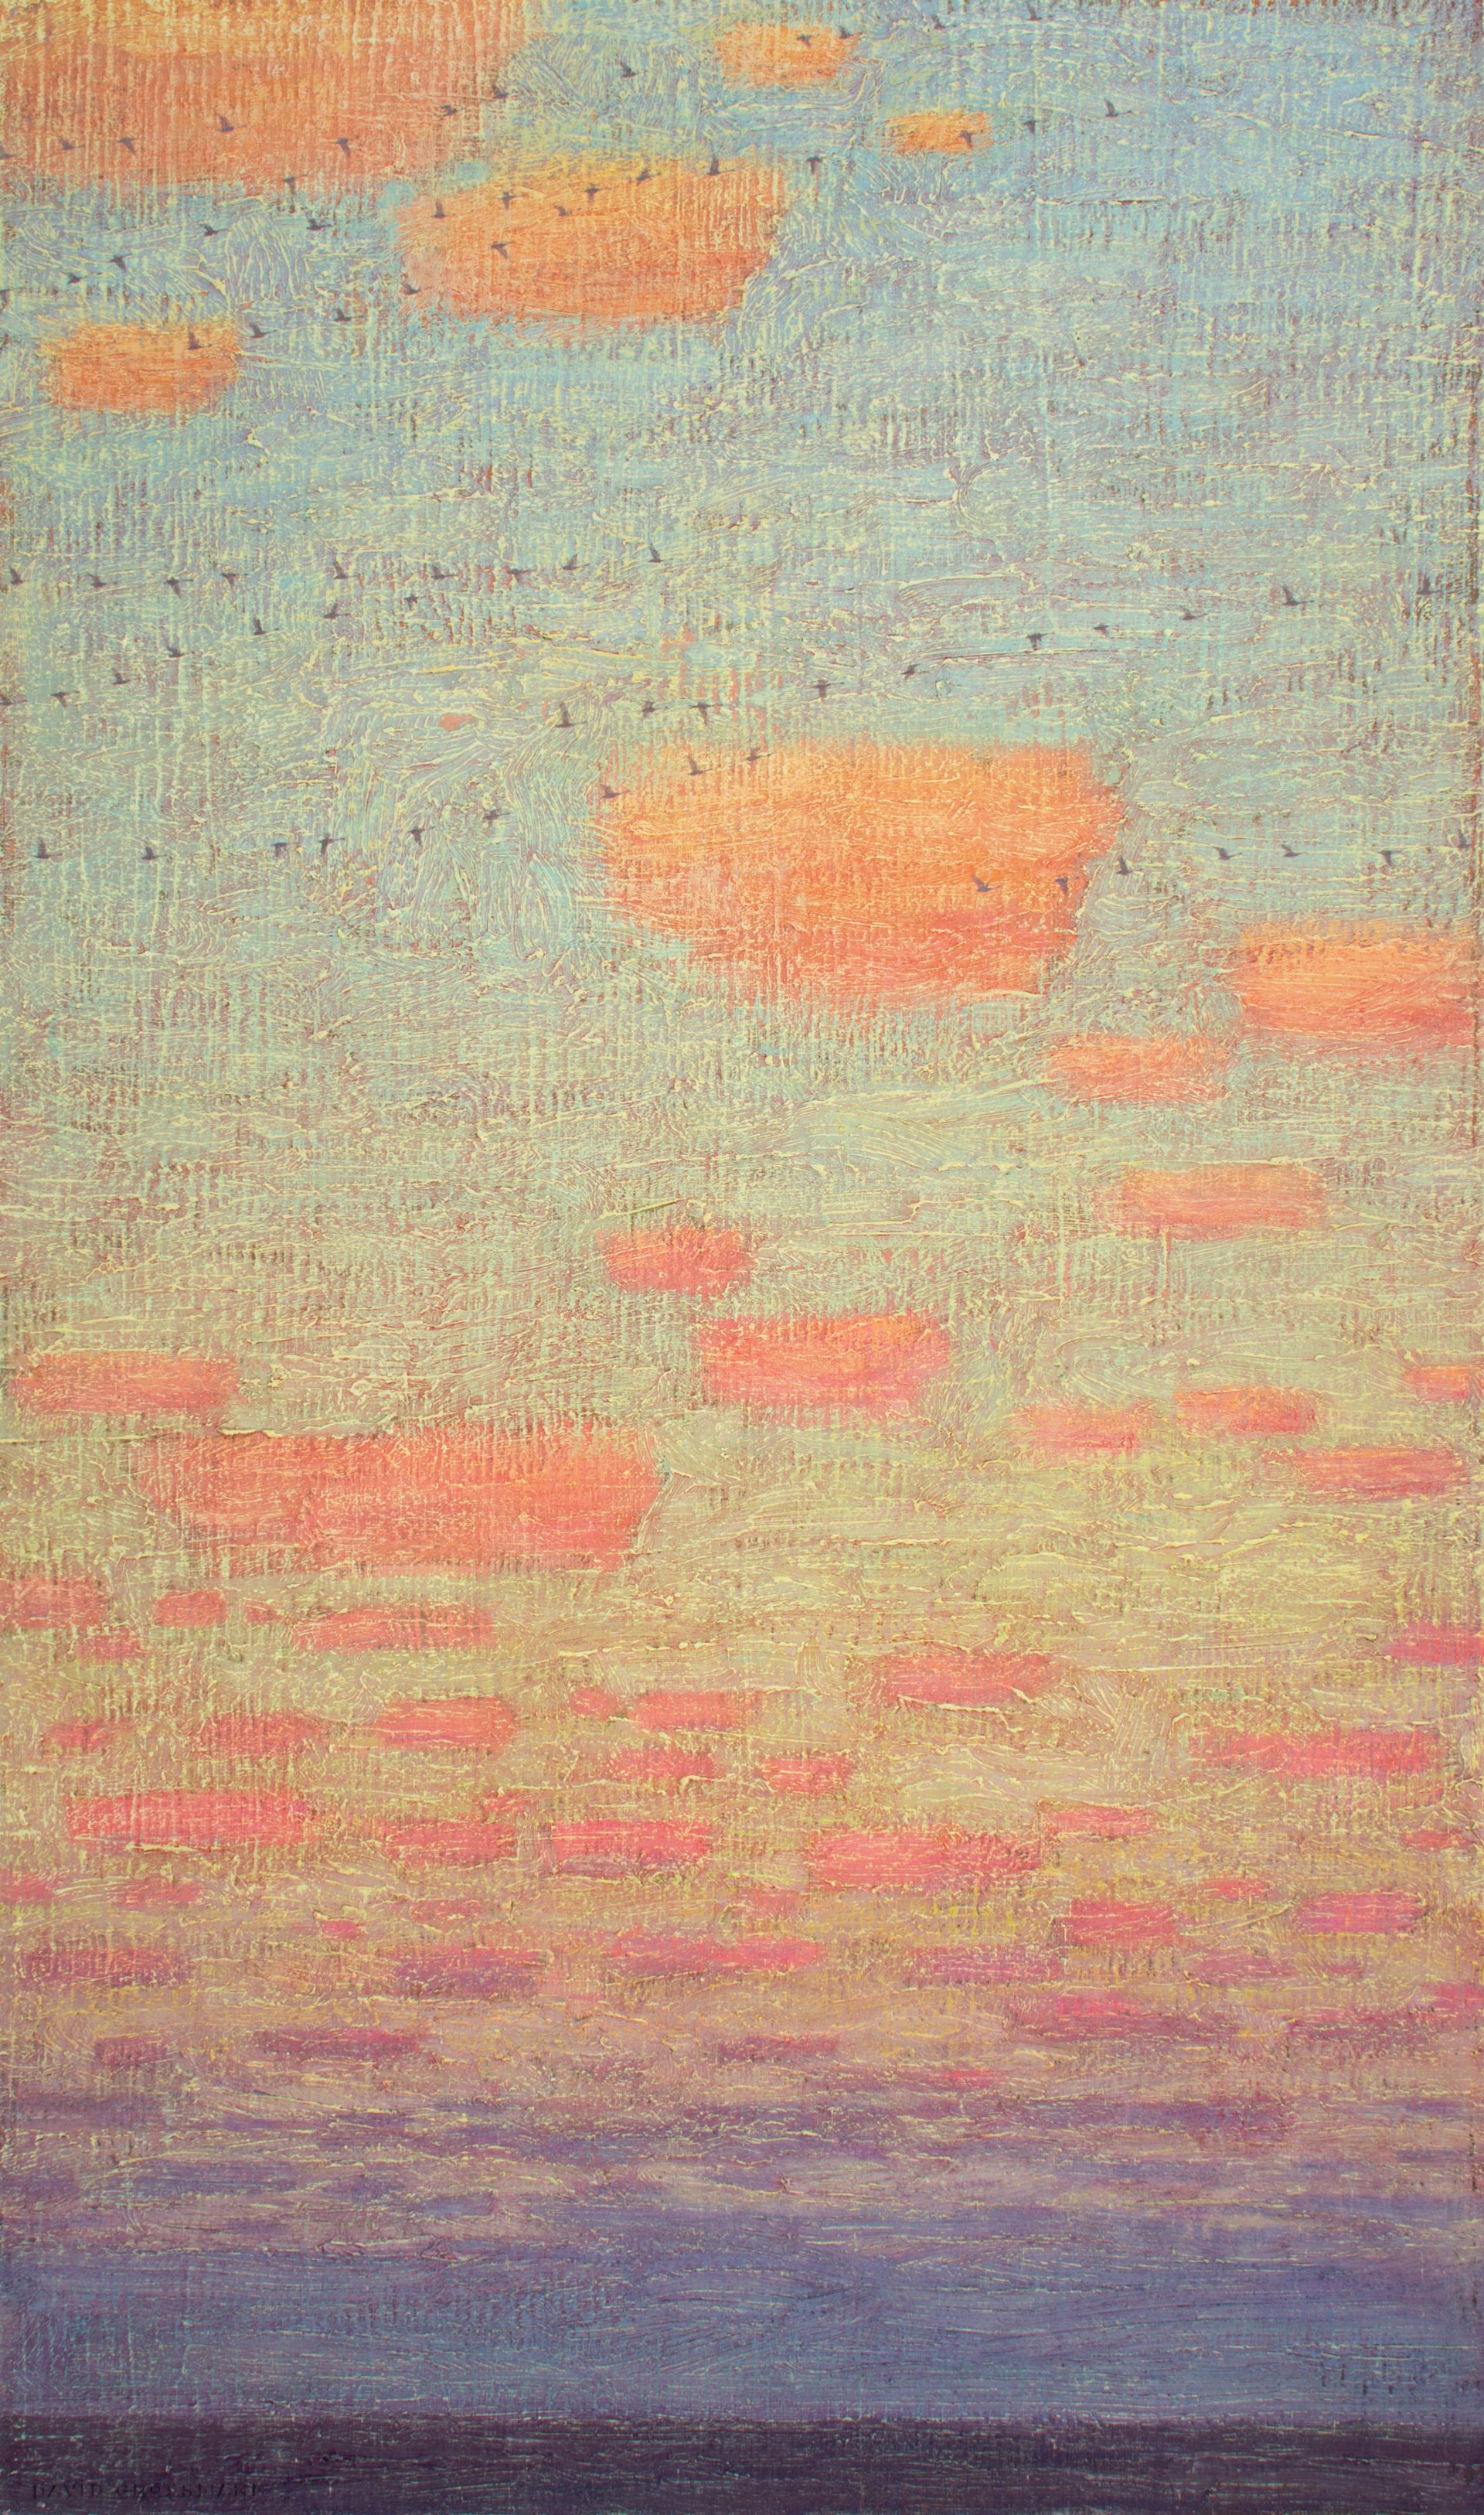 Sunset Clouds with Strands of Geese by David Grossmann